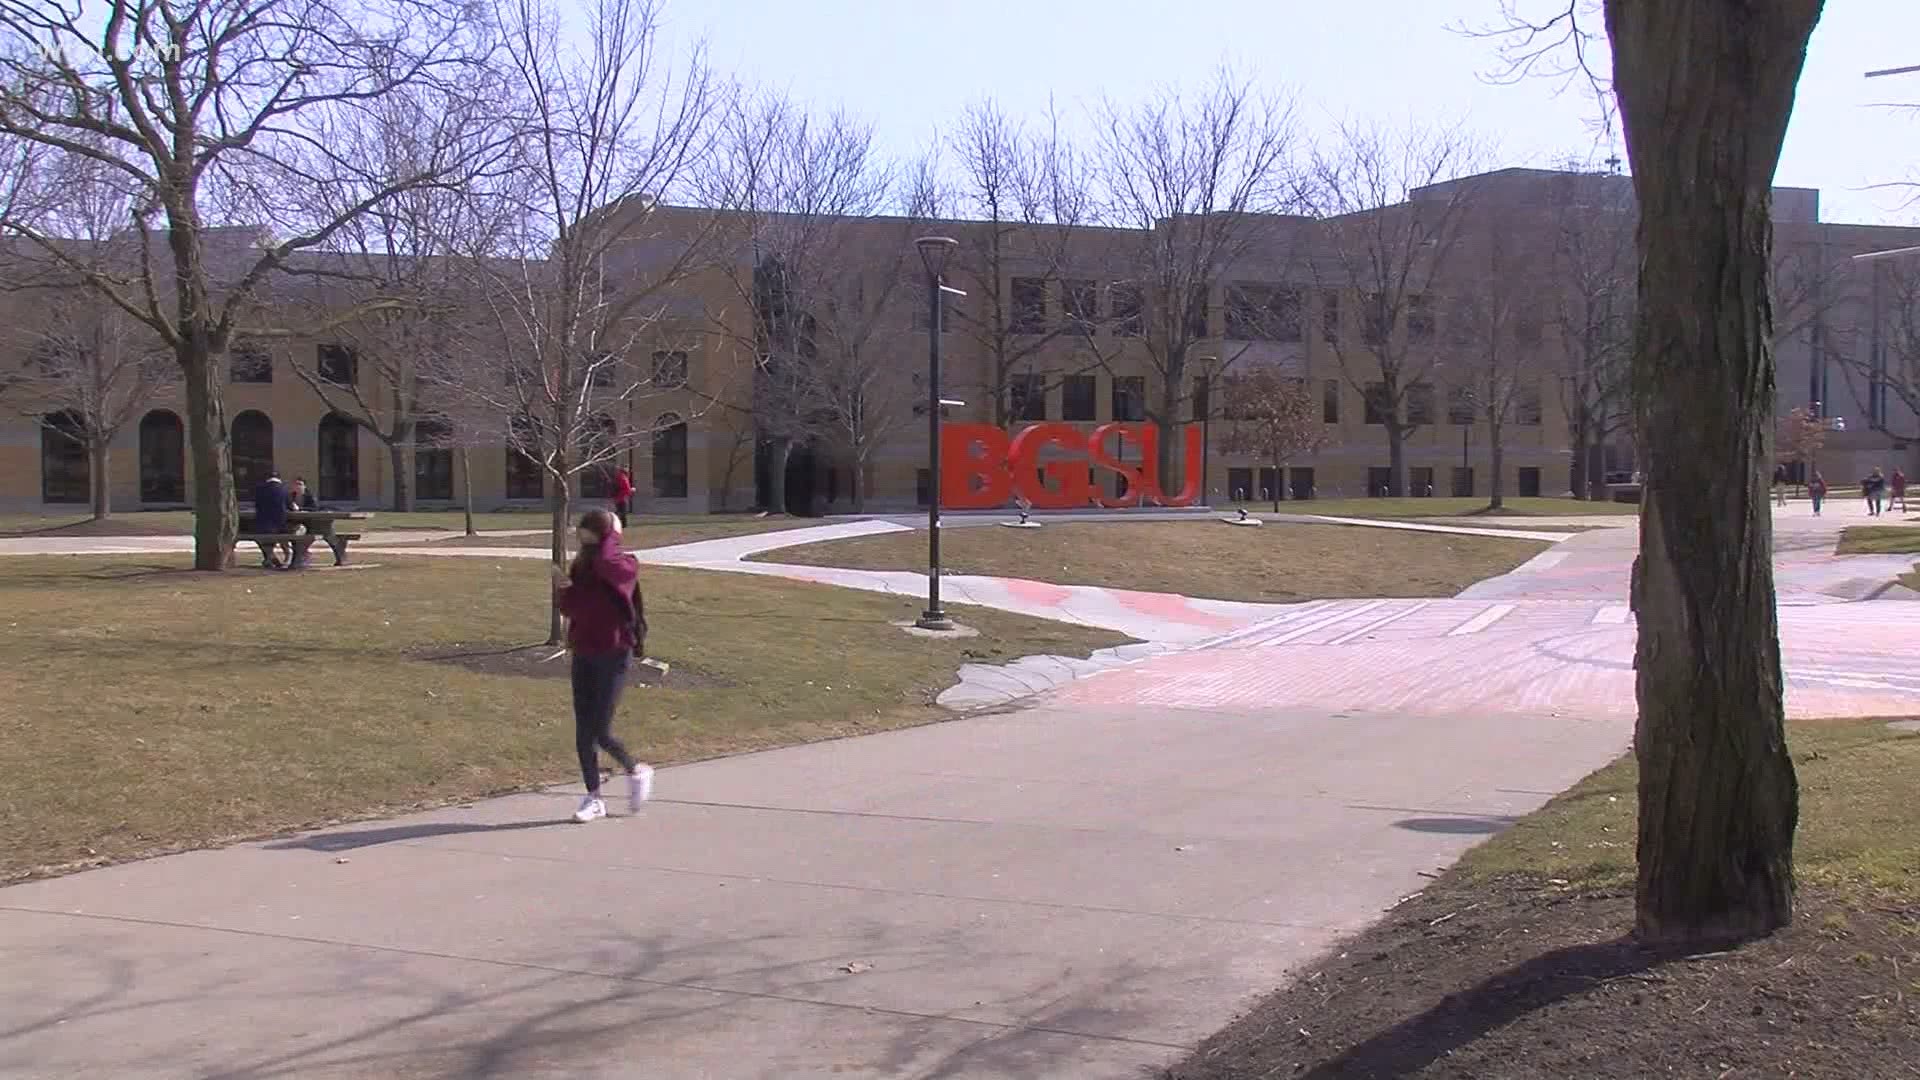 Students say they are upset things like this happen when it could be avoided. They believe it shouldn't take a student's death to address issues with Greek life.